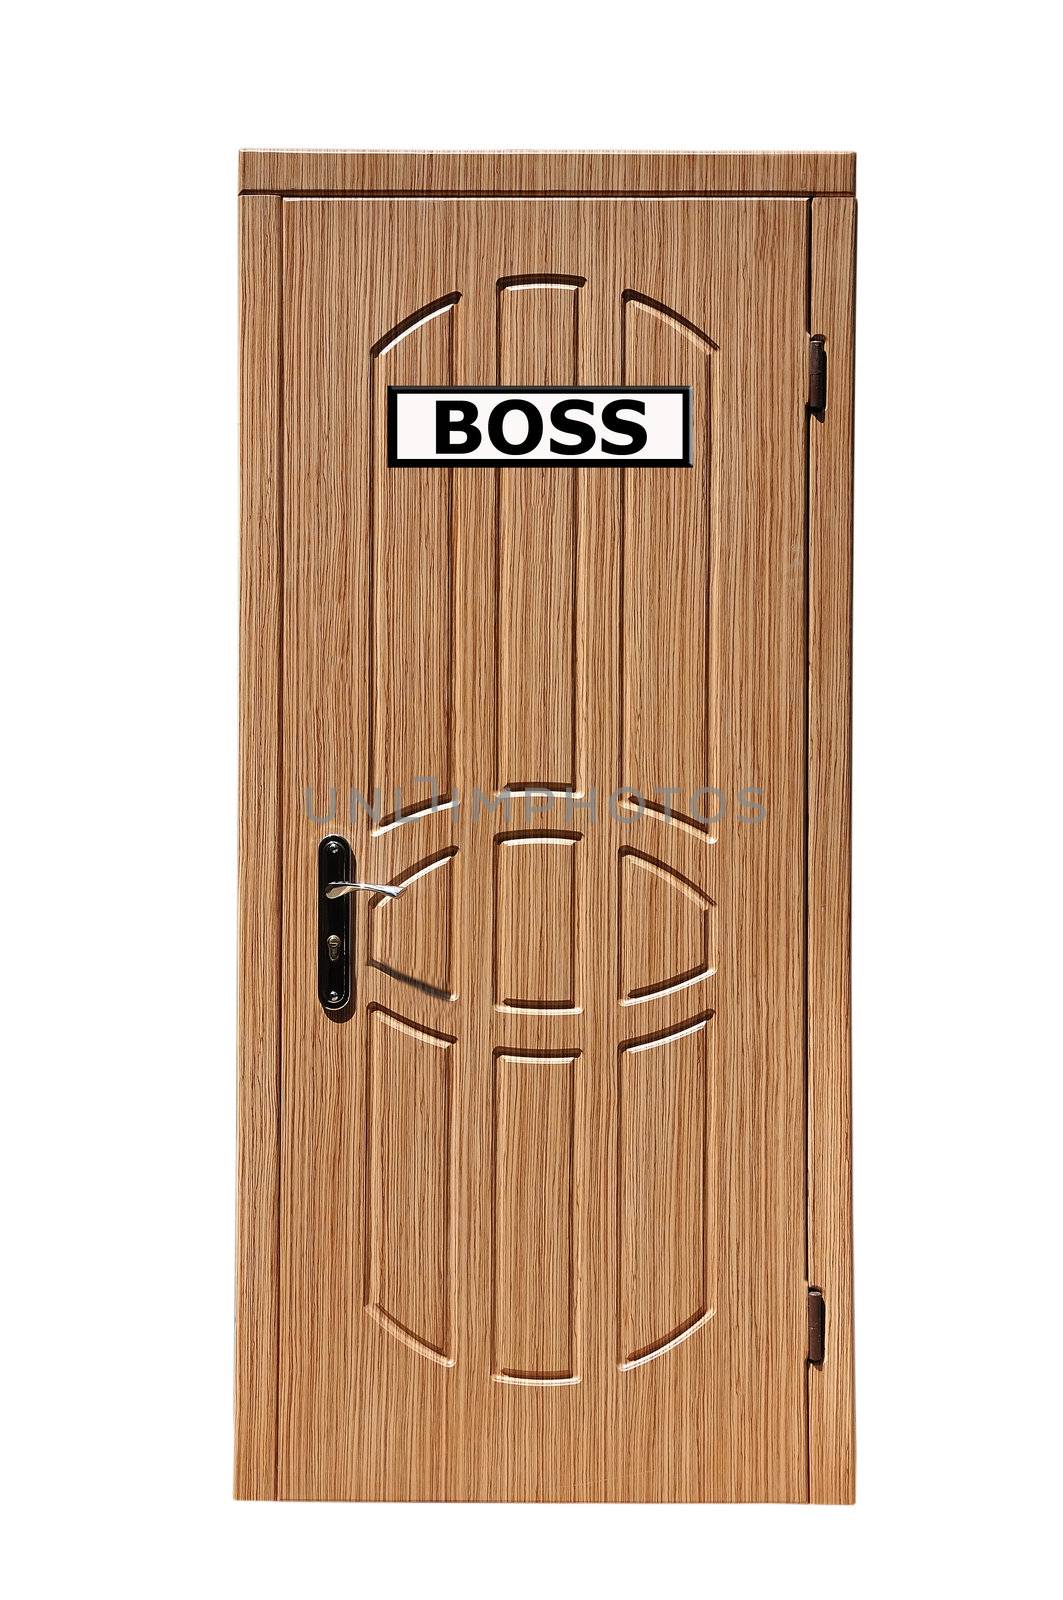 nameplate boss on door on a white background